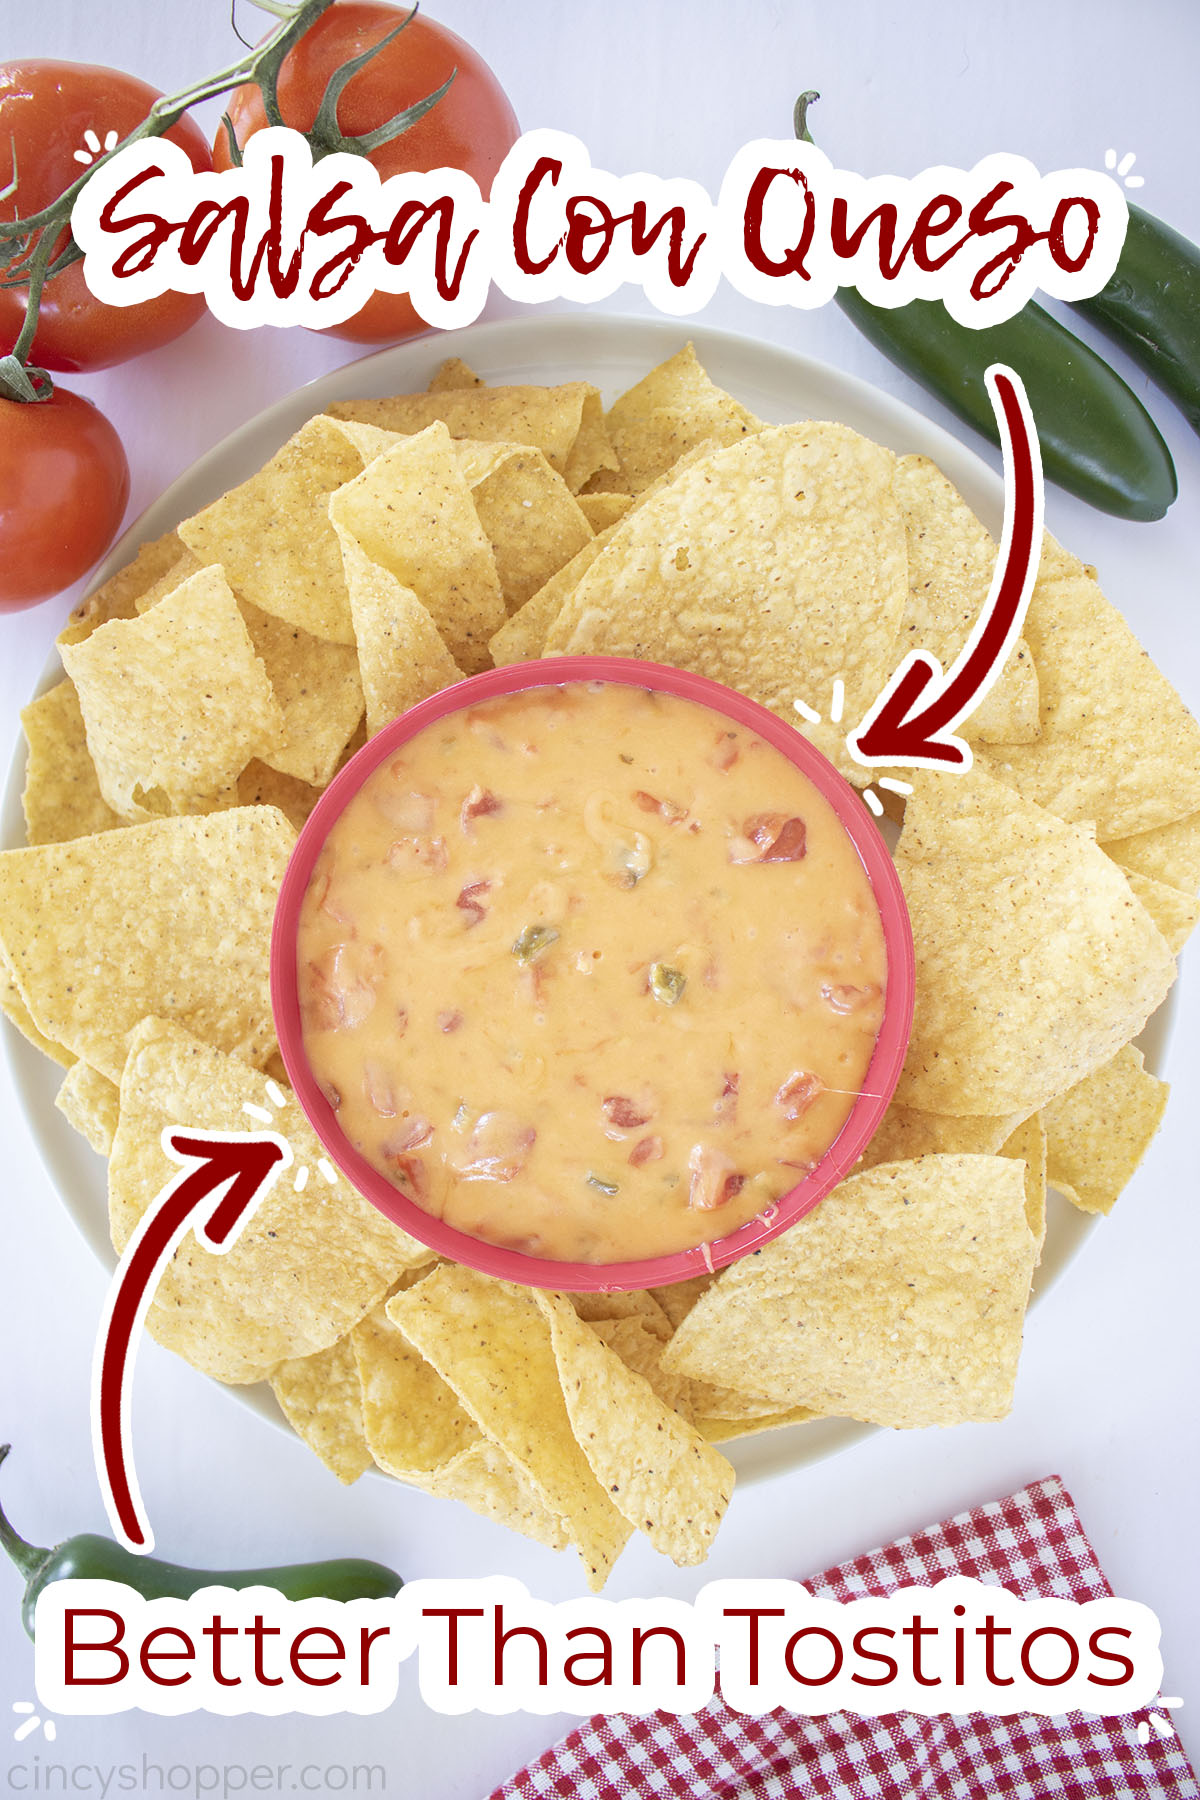 Text on image Salsa Con Queso Better than Tostitos